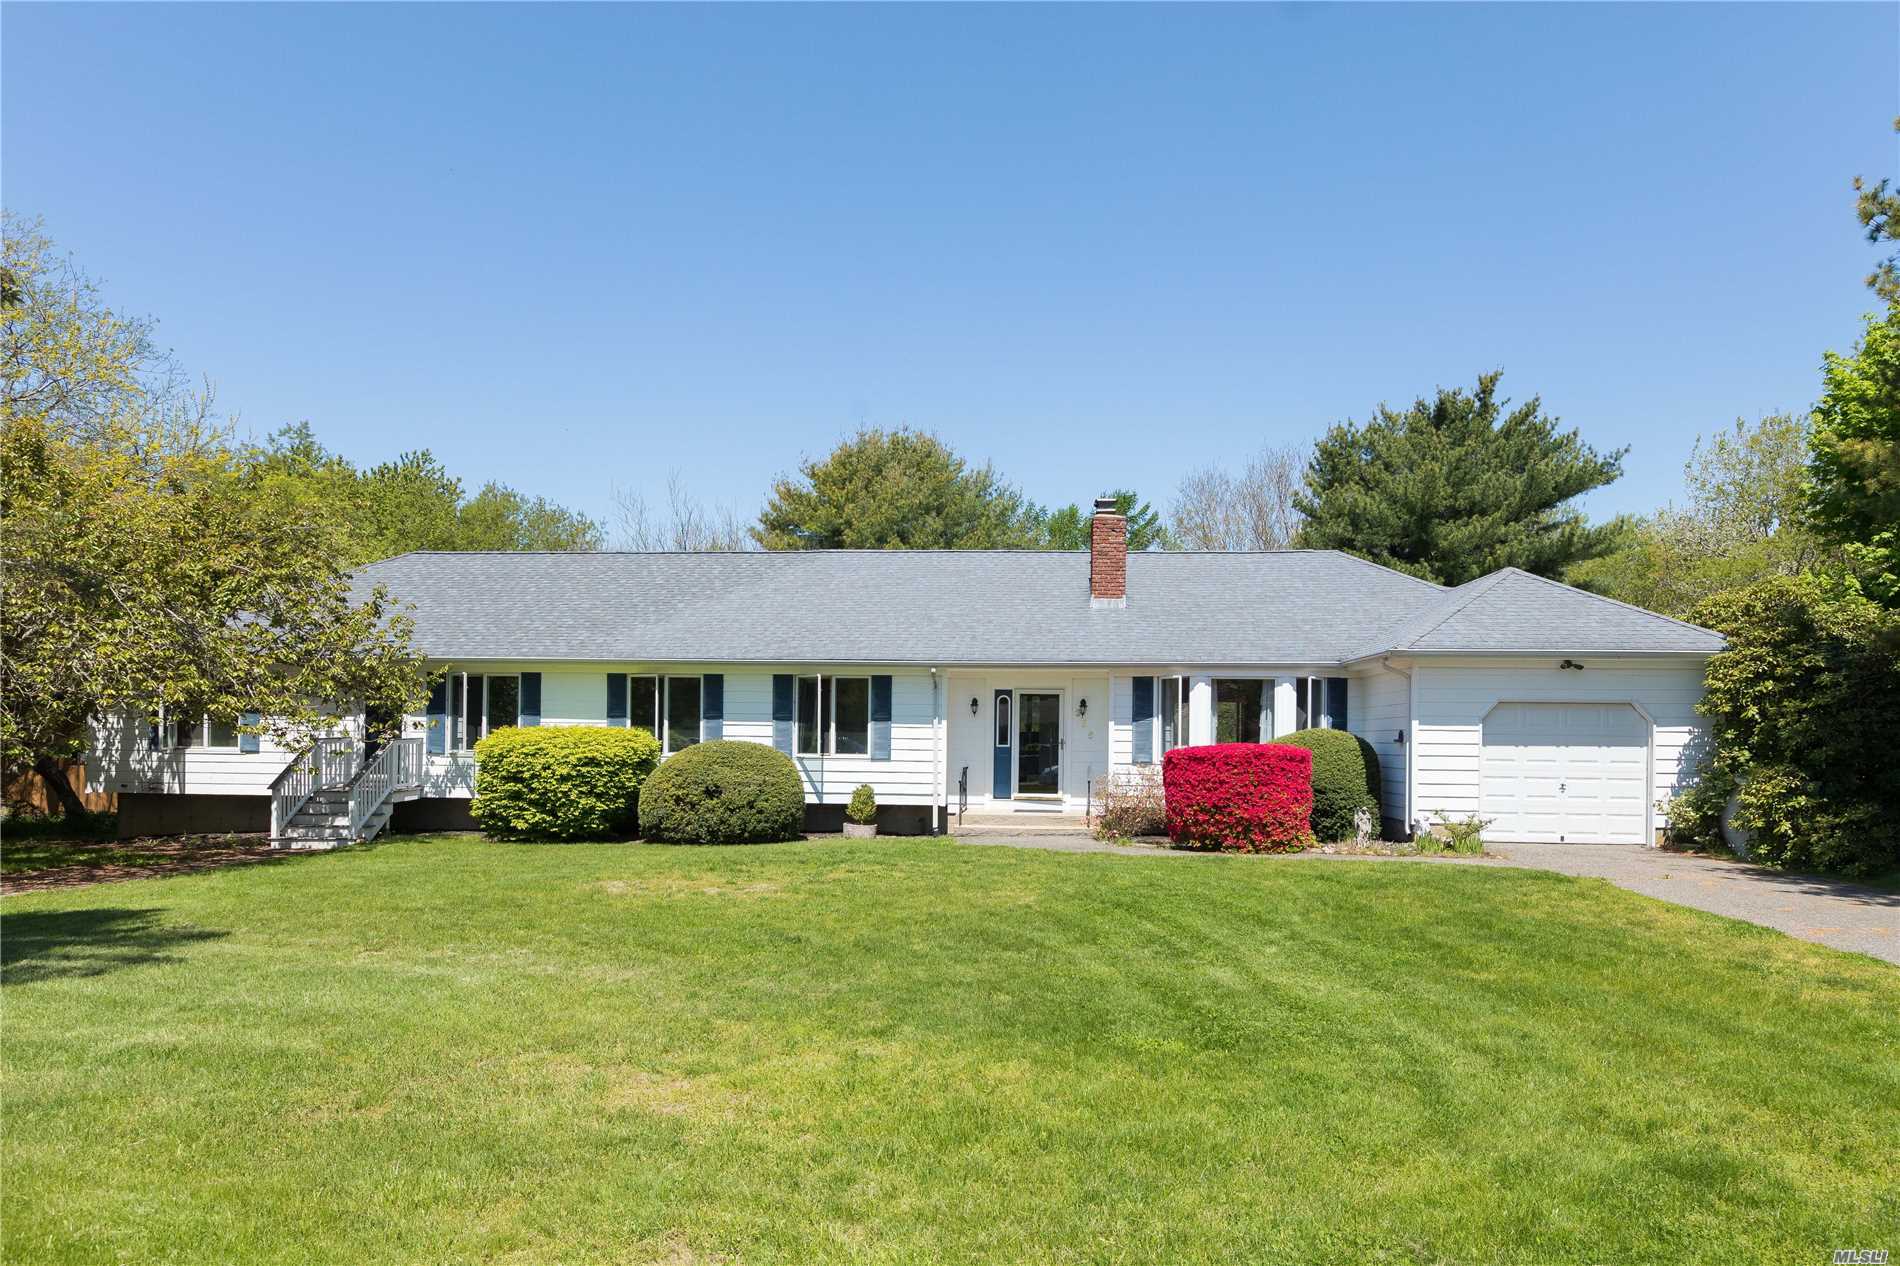 A sprawling 4 bedroom, 3 bath Ranch with many opportunities, situated on a shy acre just a short distance from the heart of Southold Village. Beautifully landscaped park-like back yard with plenty of room for a pool. Close to shopping, restaurants, transportation And Schools. Separate guest wing, possible mother/daughter.